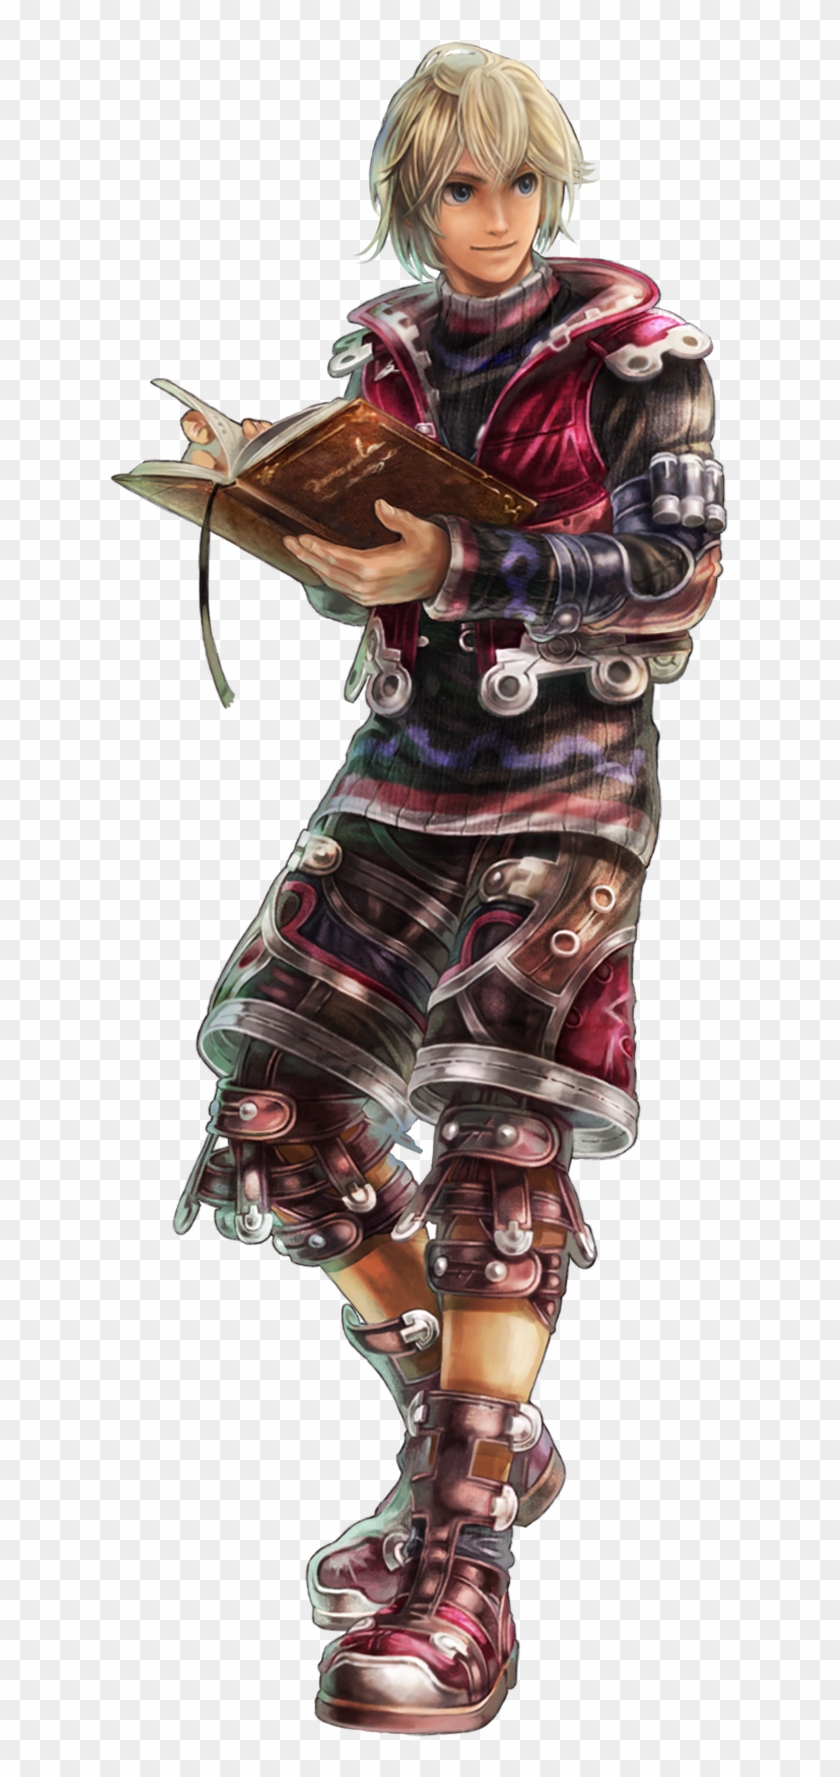 Picture - Xenoblade Chronicles Shulk Png Clipart #5000197